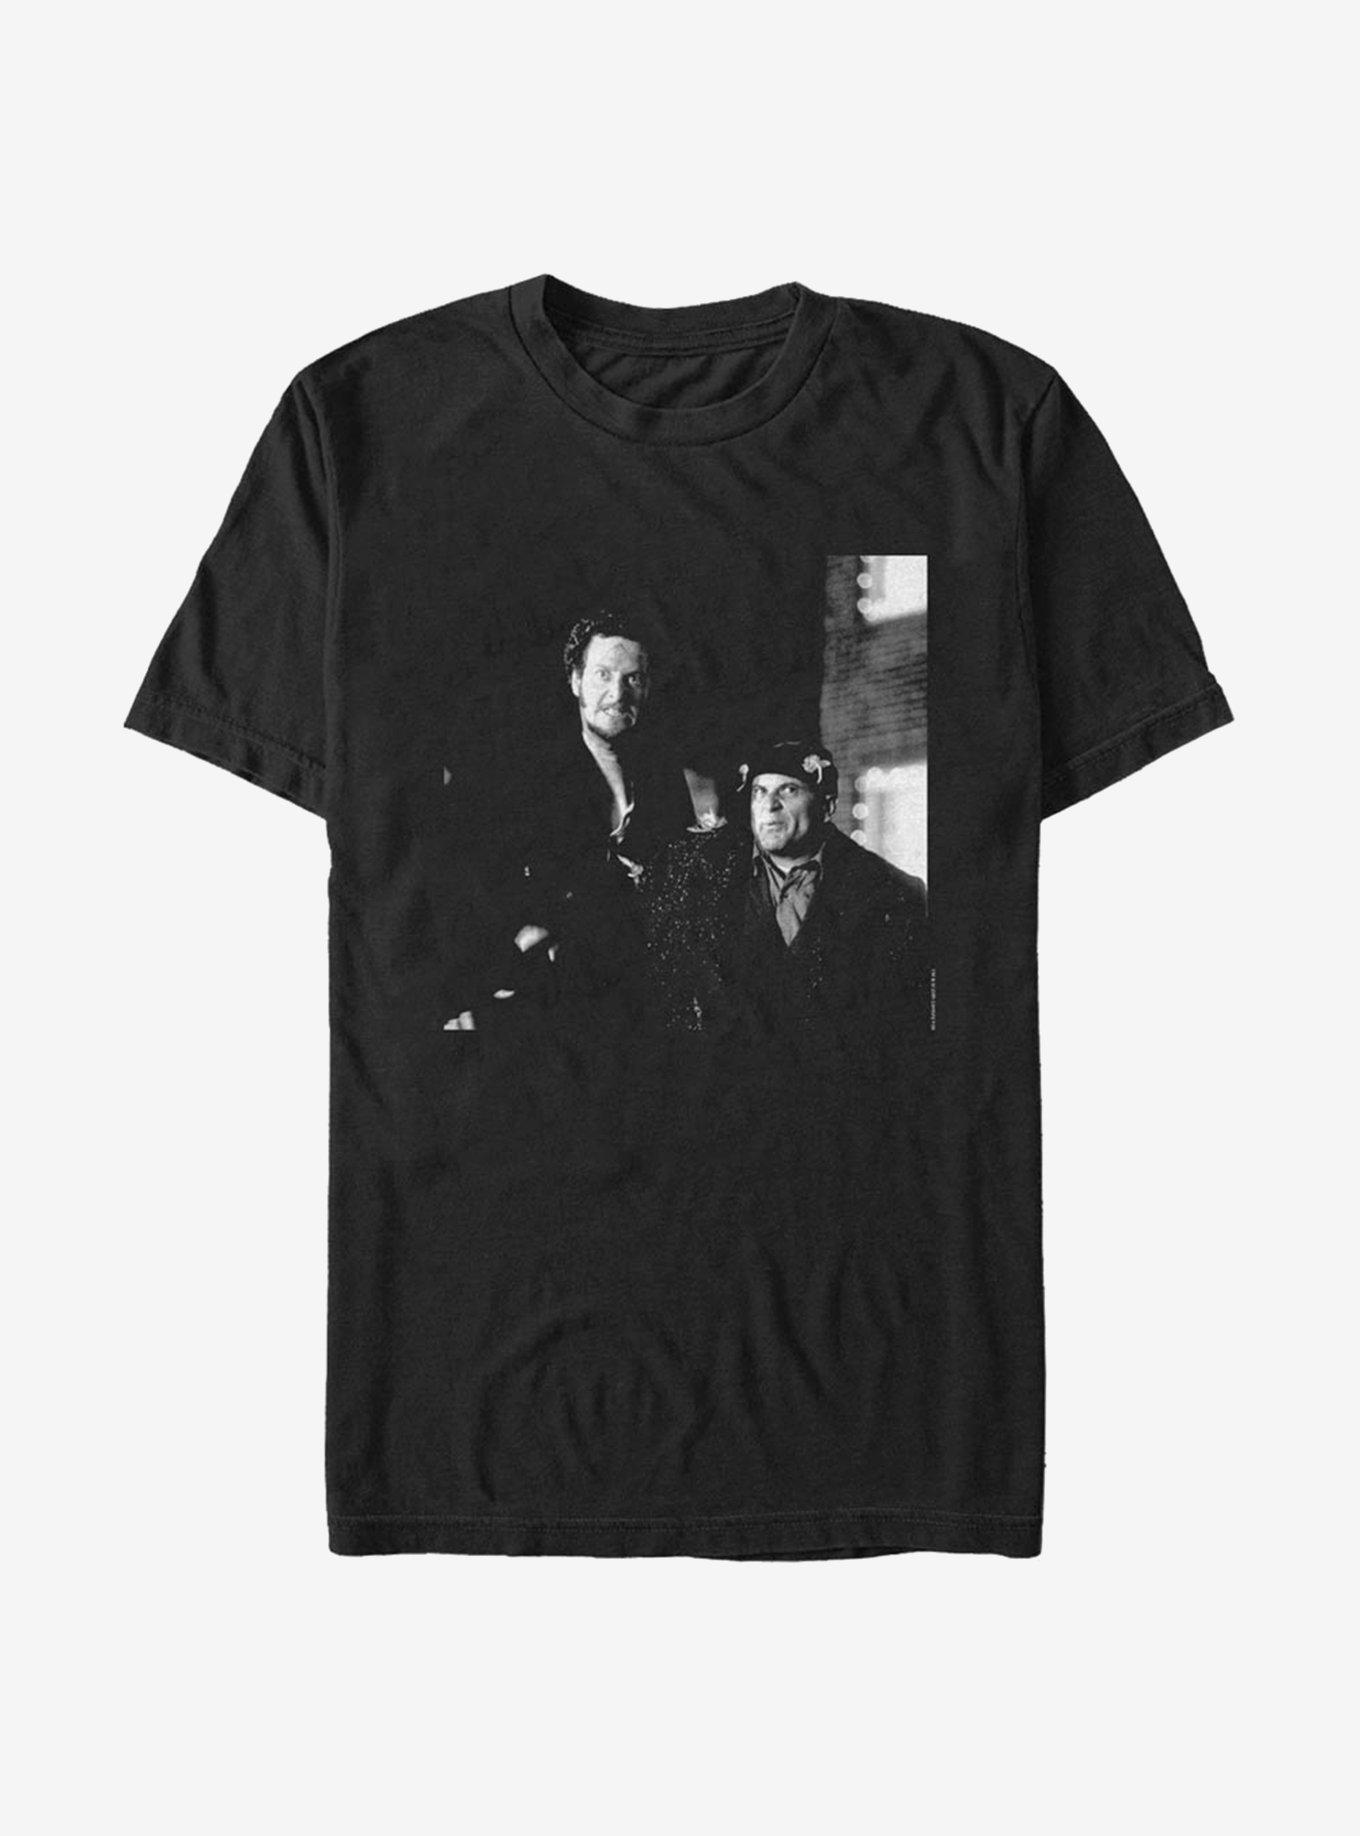 Home Alone Harry And Marv Photo T-Shirt, BLACK, hi-res